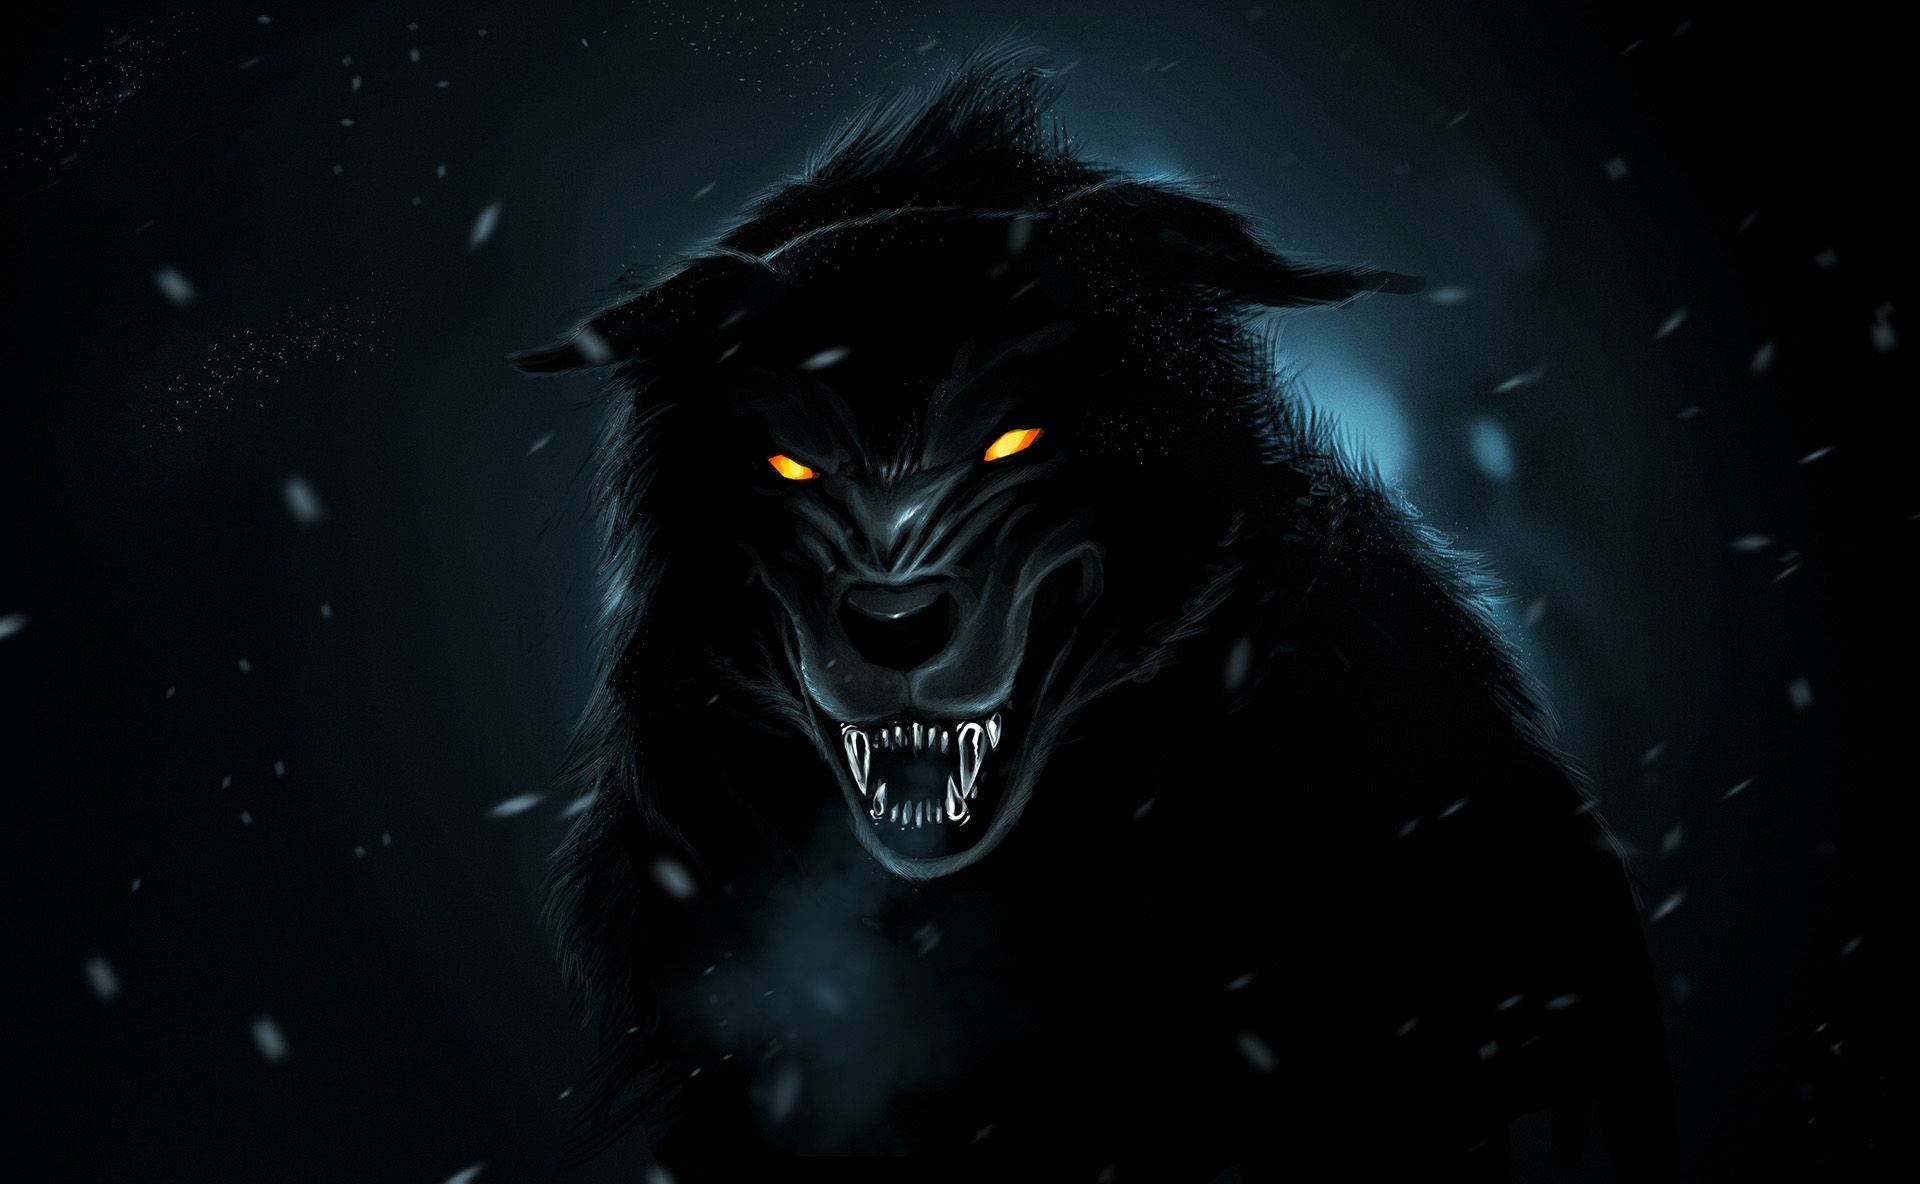 Majestic 3D Ghost Wolf in a Mysterious Dark Setting Wallpaper